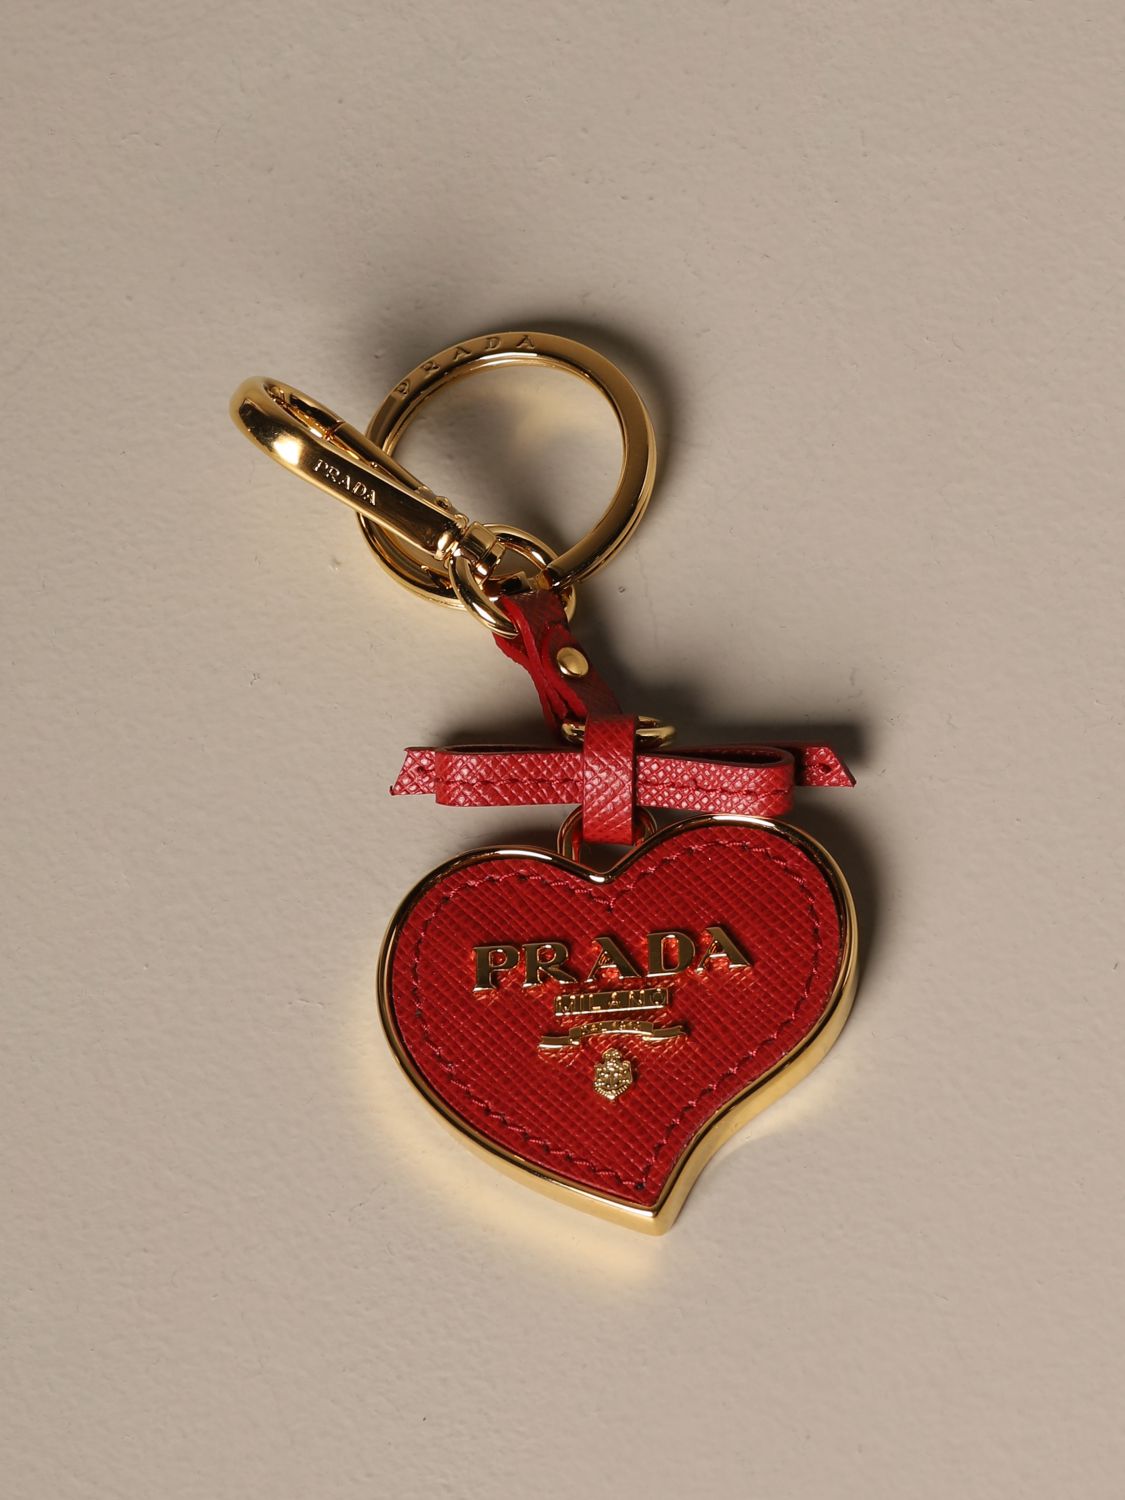 Prada key chain metal and leather - red - $276 New With Tags